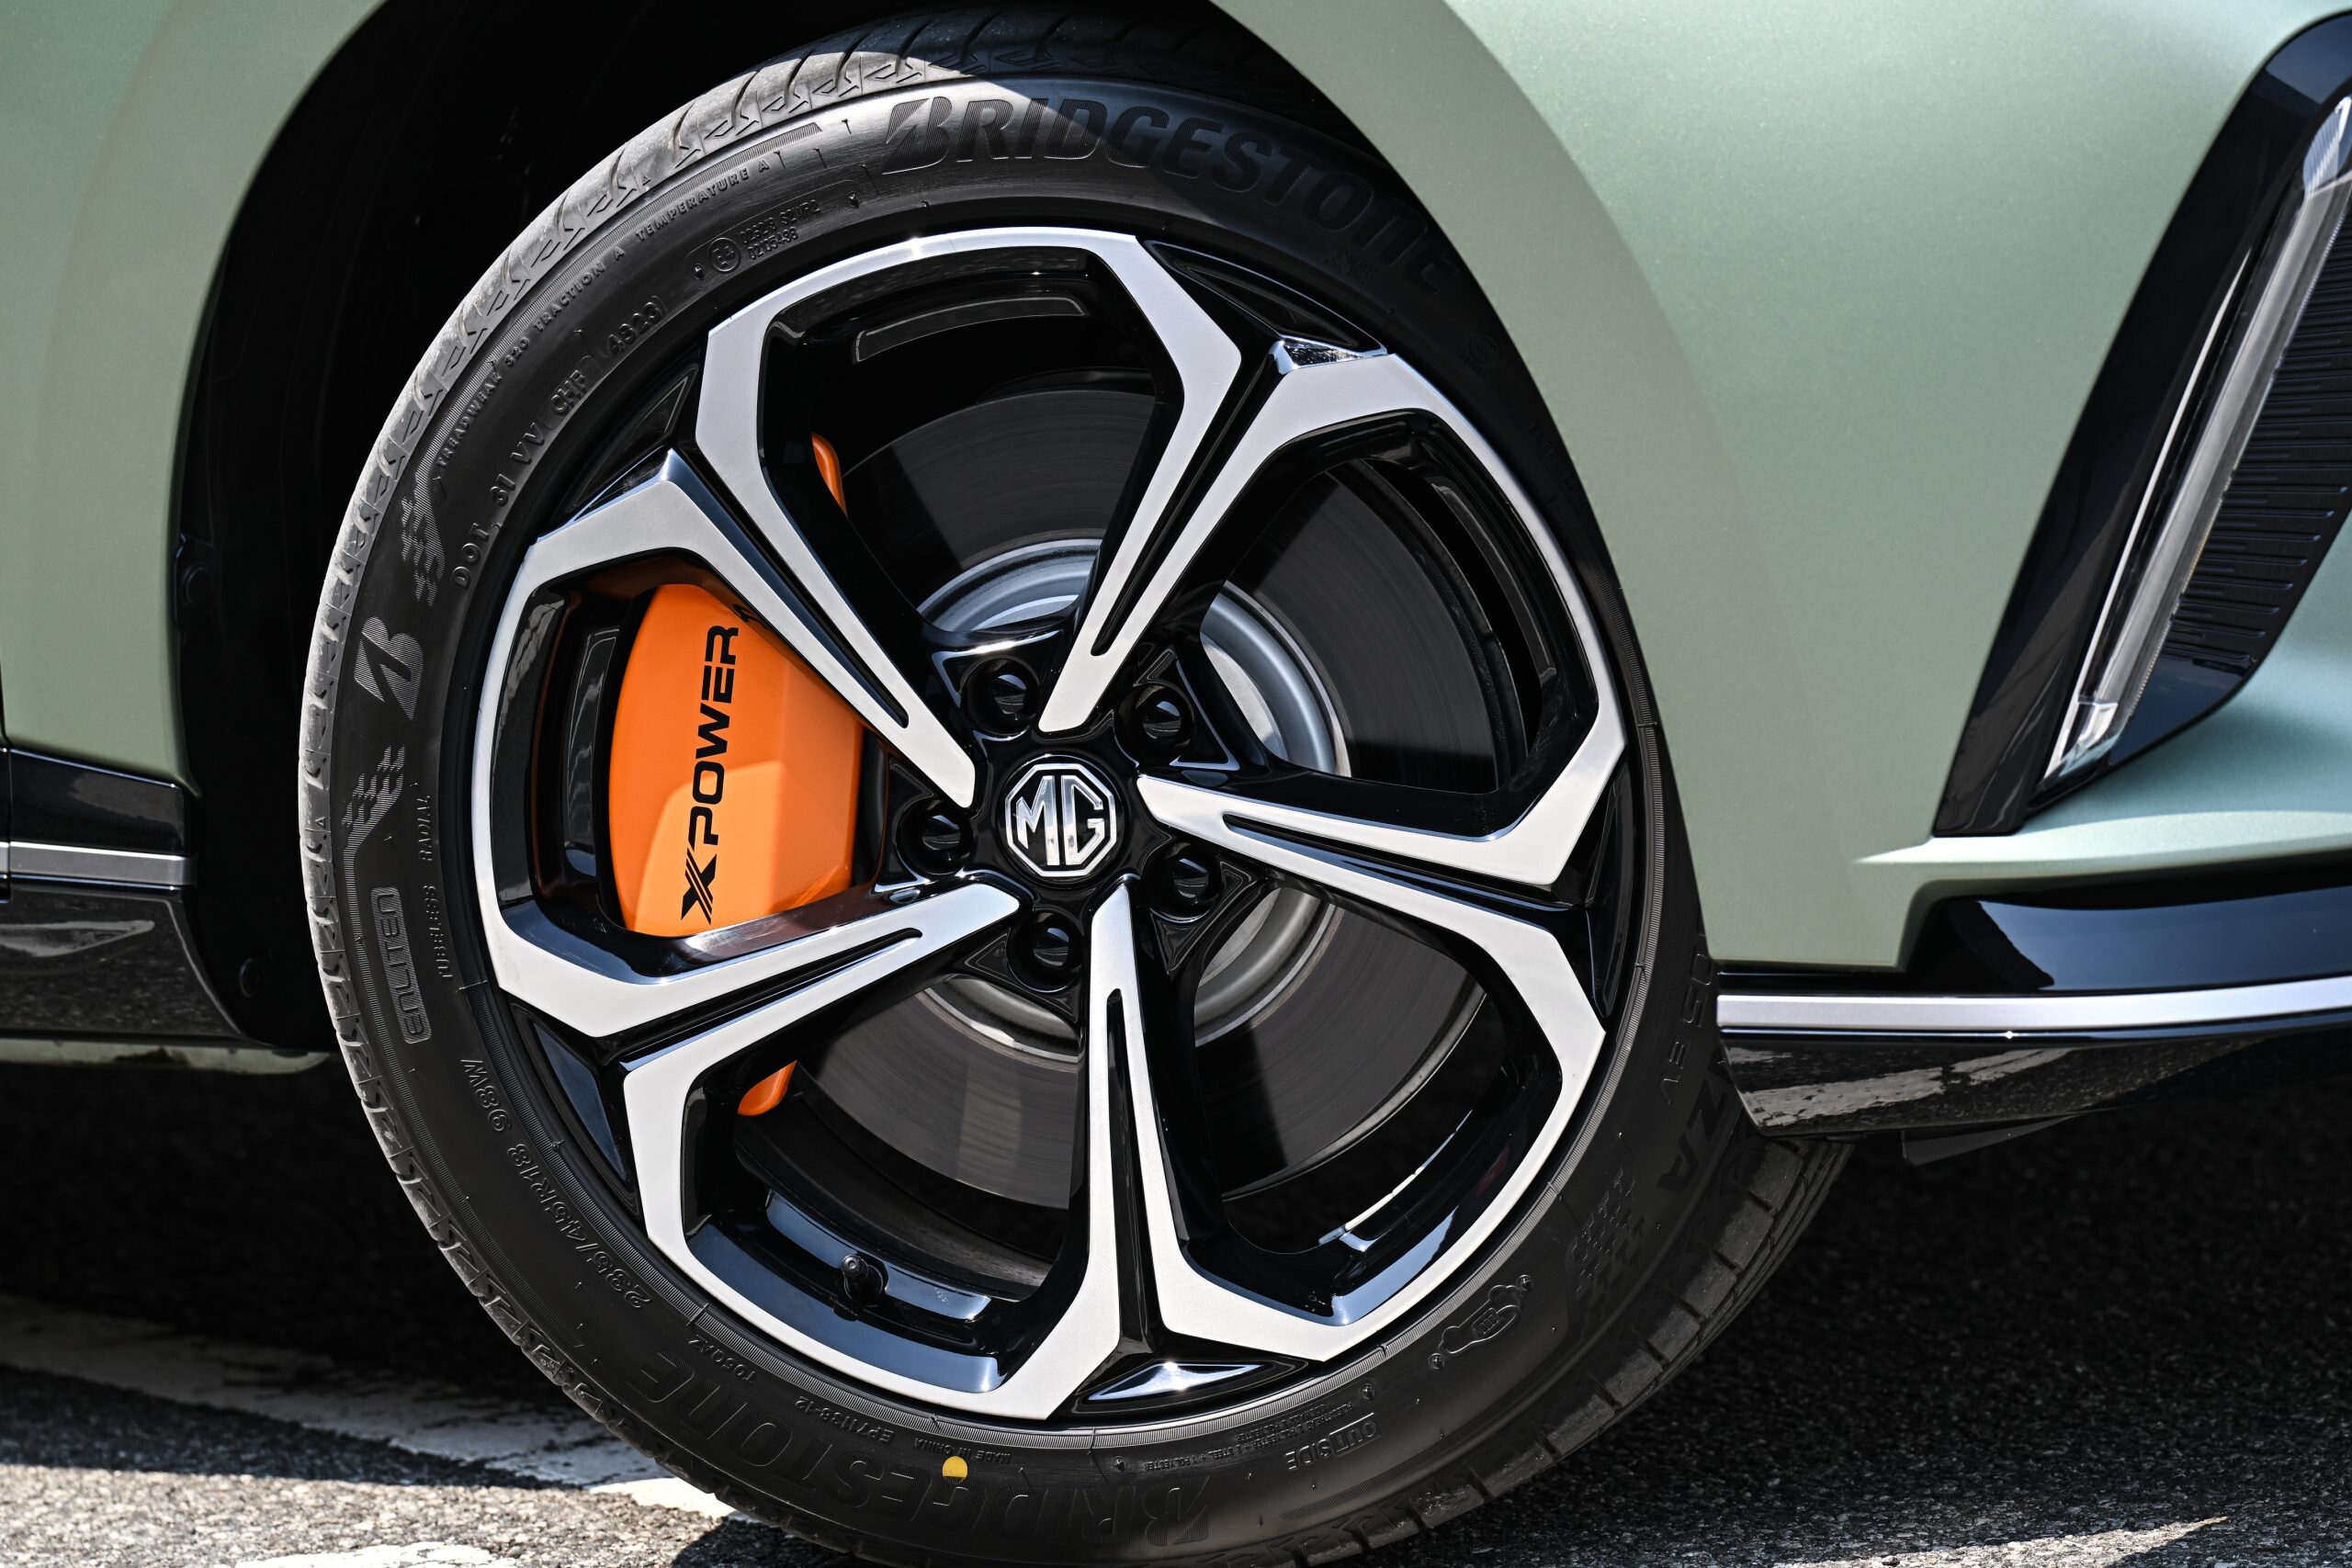 "BRIDGESTONE TURANZA T005 EV, a Premium High-Performance for EVs with the Cutting-Edge ENLITEN(R) Technology" Selected as Original Equipment to Elevate a New EV "MG4 XPOWER" from MG